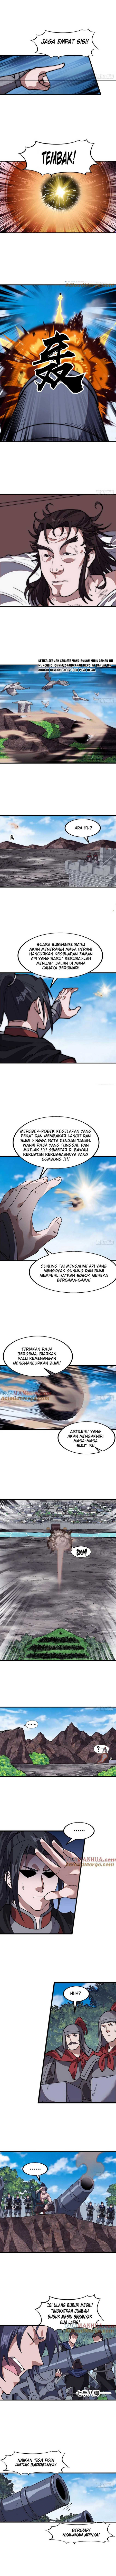 It Starts With A Mountain Chapter 655 bahasa Indonesia